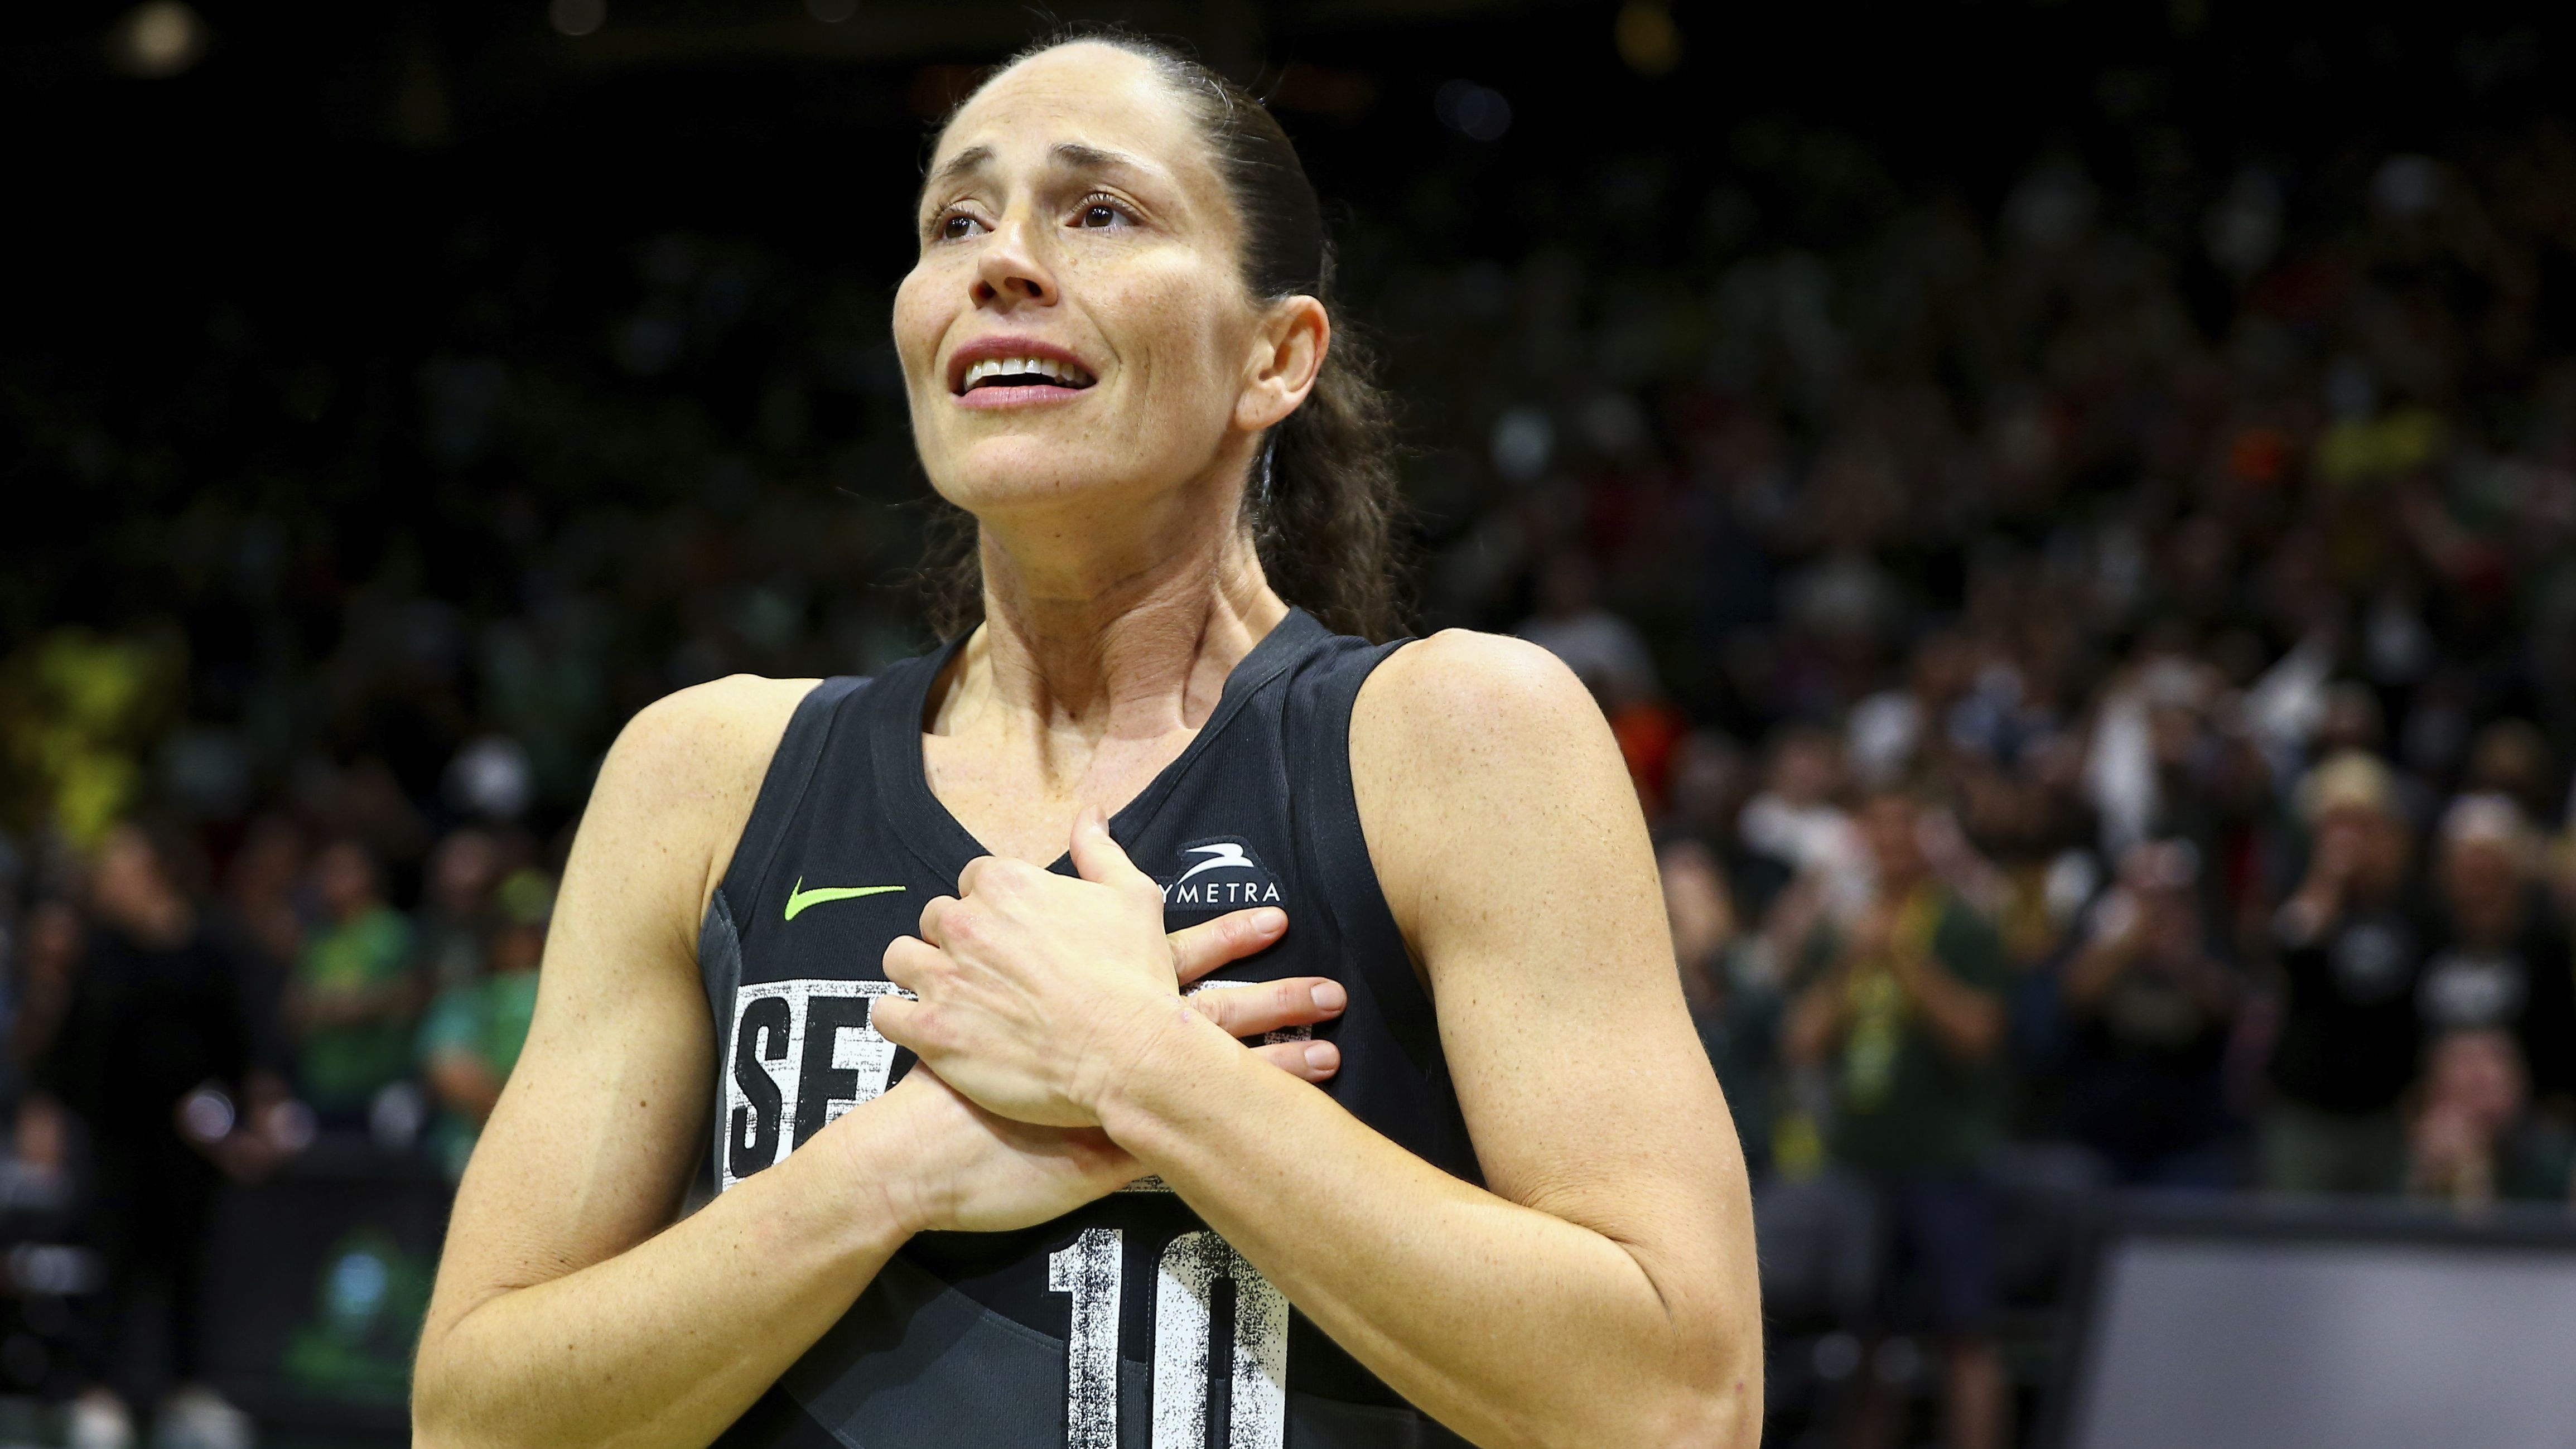 Seattle guard Sue Bird reacts to fans chanting "Thank you, Sue" after the Storm were eliminated from the WNBA playoffs on Tuesday, September 6. Bird, one of the best women's basketball players in history, is retiring after this season.